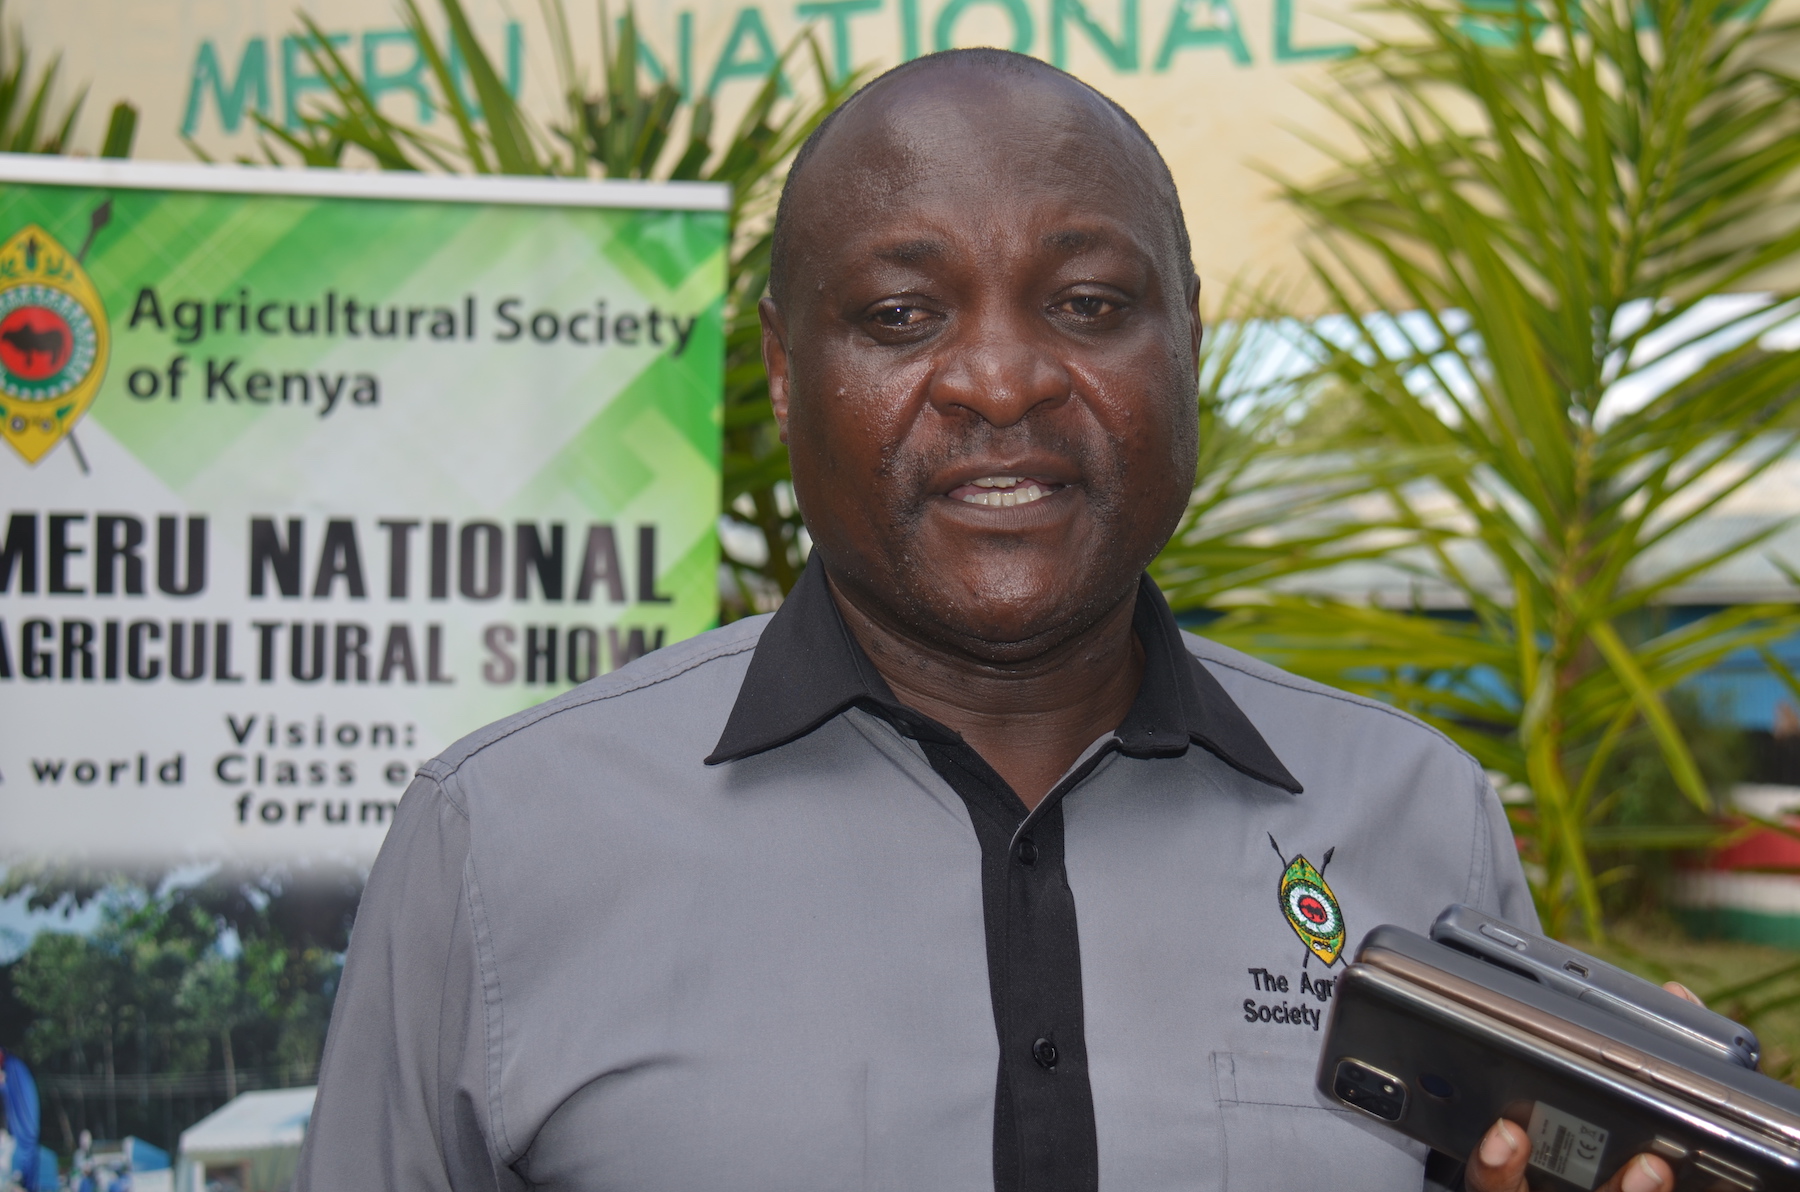 All systems go for Meru National Agricultural Show